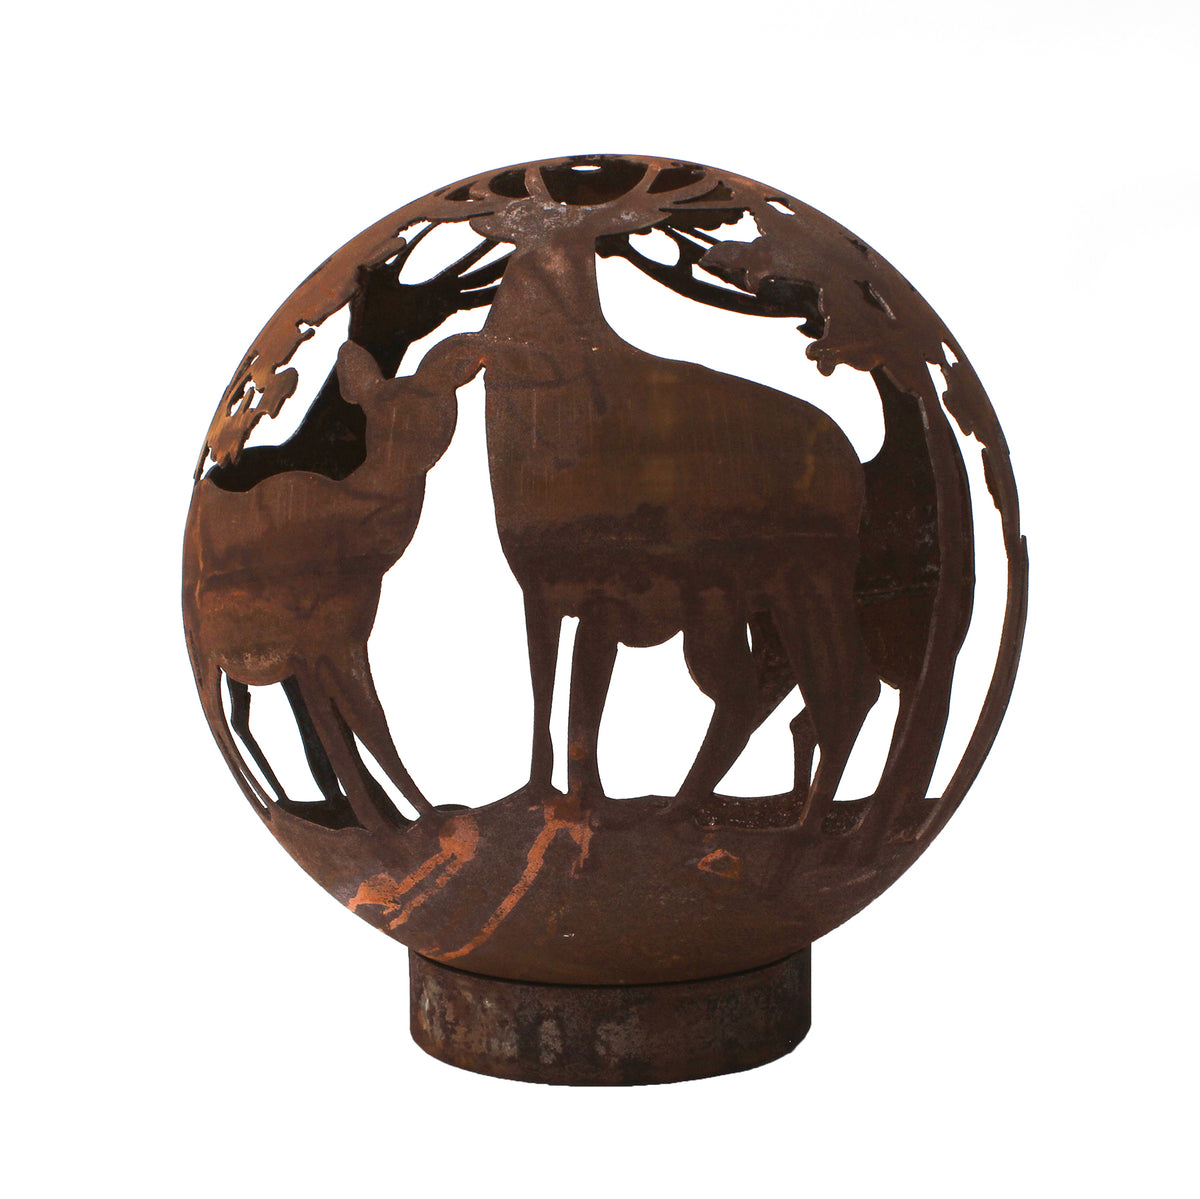 Garden Fire Ball 50cm Stag Design with Rust Finish